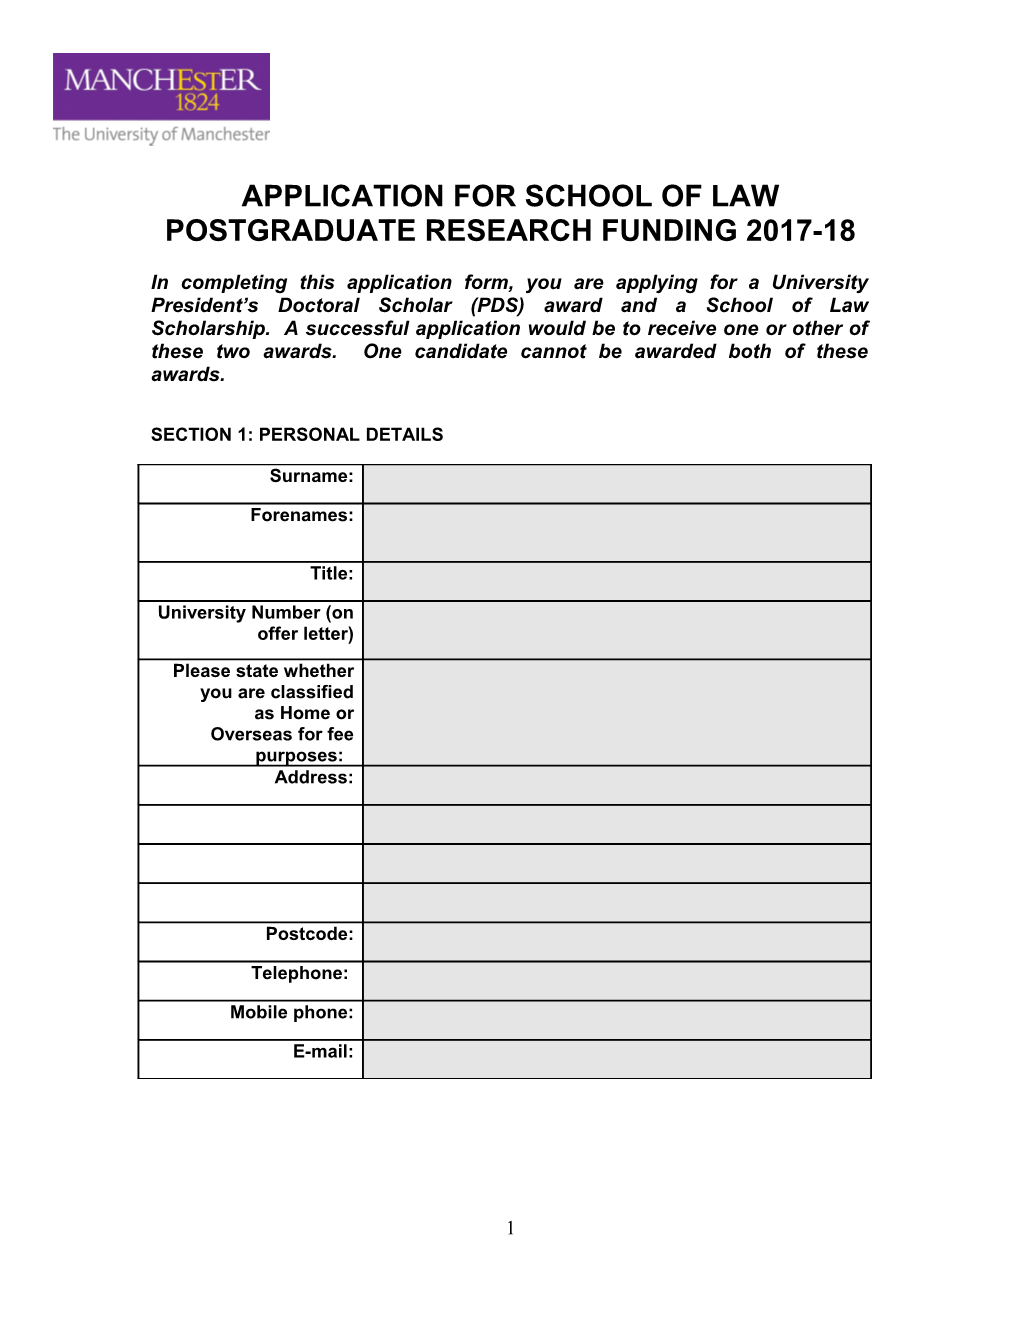 Application for School of Education